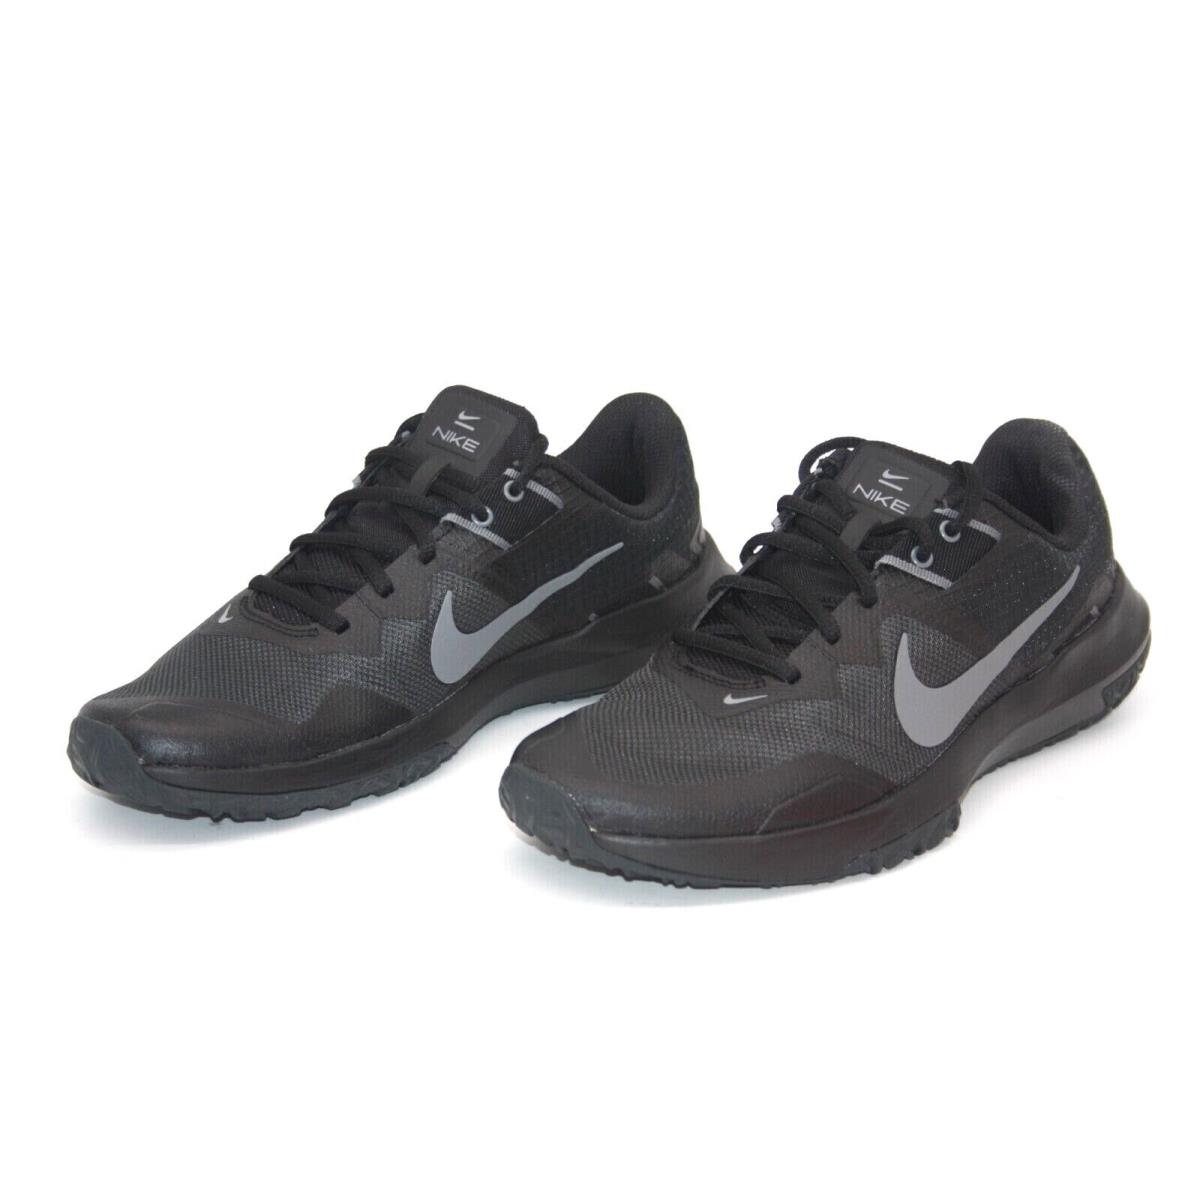 Nike shoes Varsity Compete - Gray 2